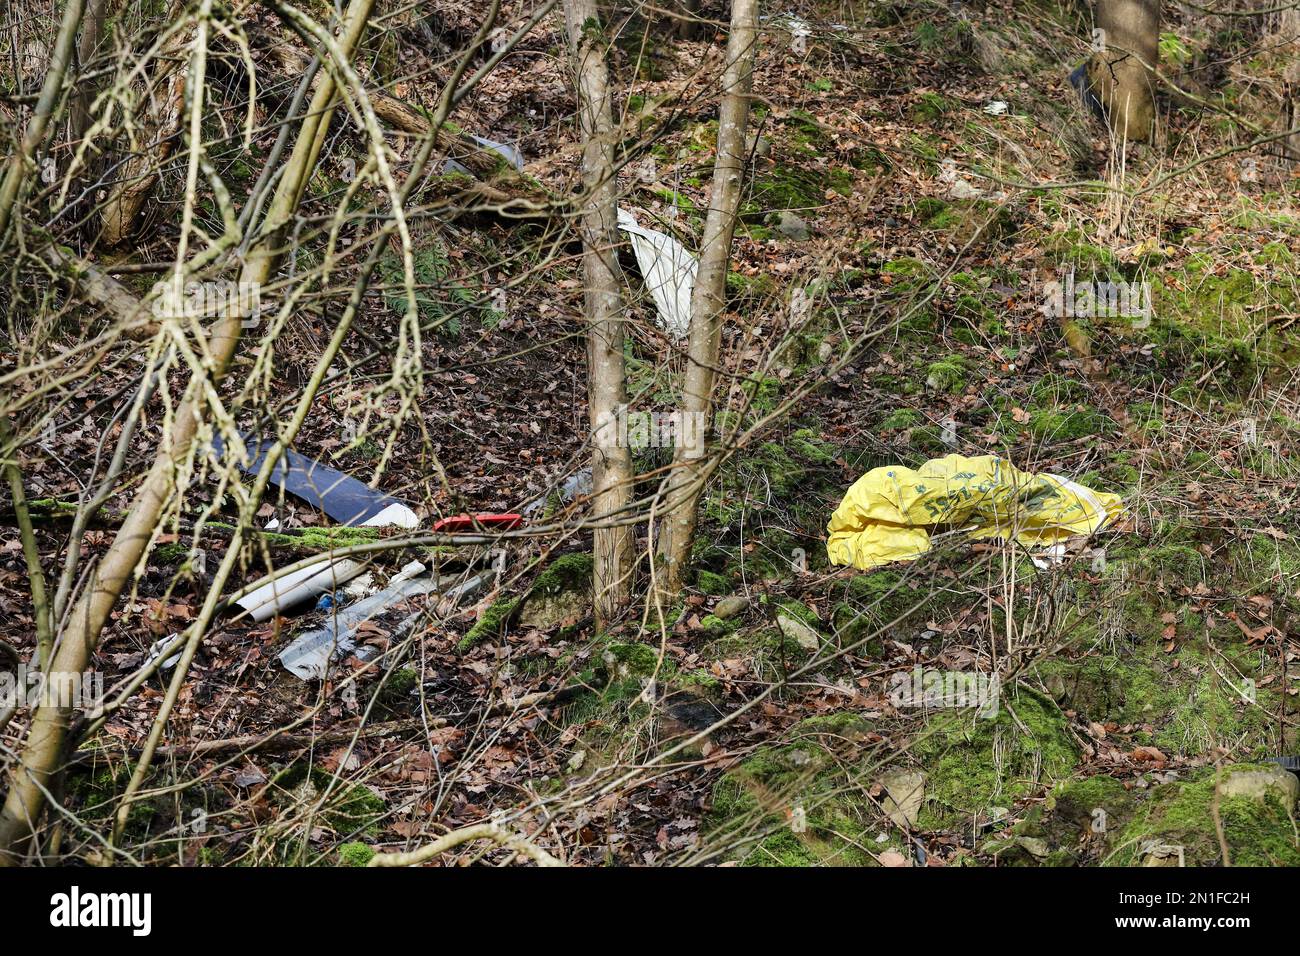 Rubbish Dumped Down a Bankside into a Woodland Nature Reserve, County Durham, UK Stock Photo